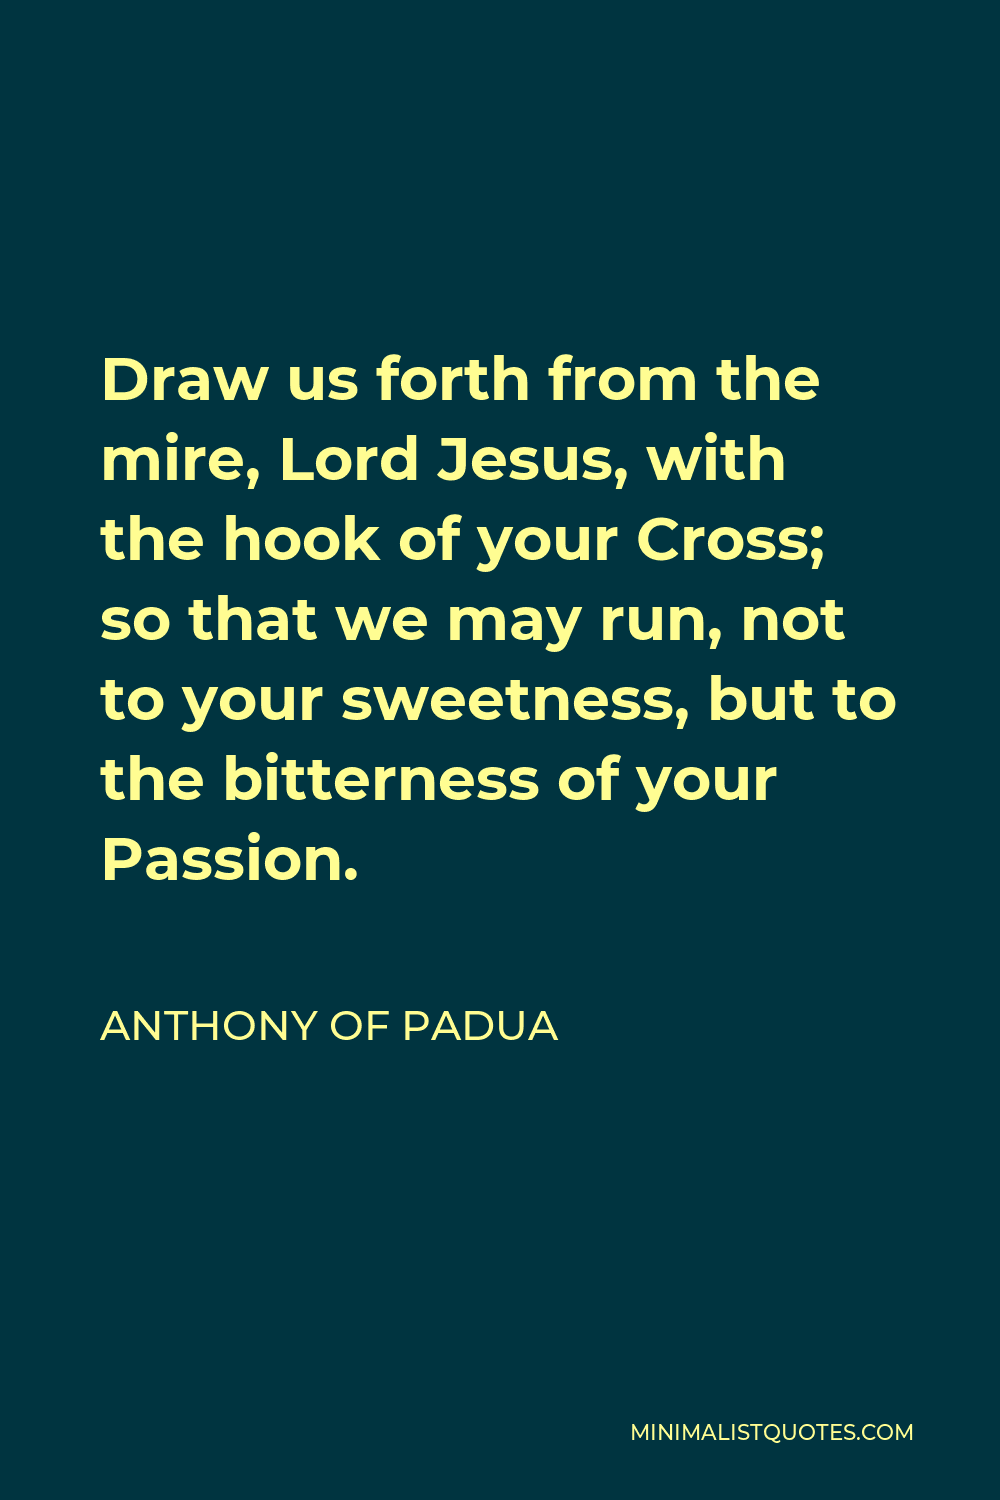 Anthony of Padua Quote - Draw us forth from the mire, Lord Jesus, with the hook of your Cross; so that we may run, not to your sweetness, but to the bitterness of your Passion.